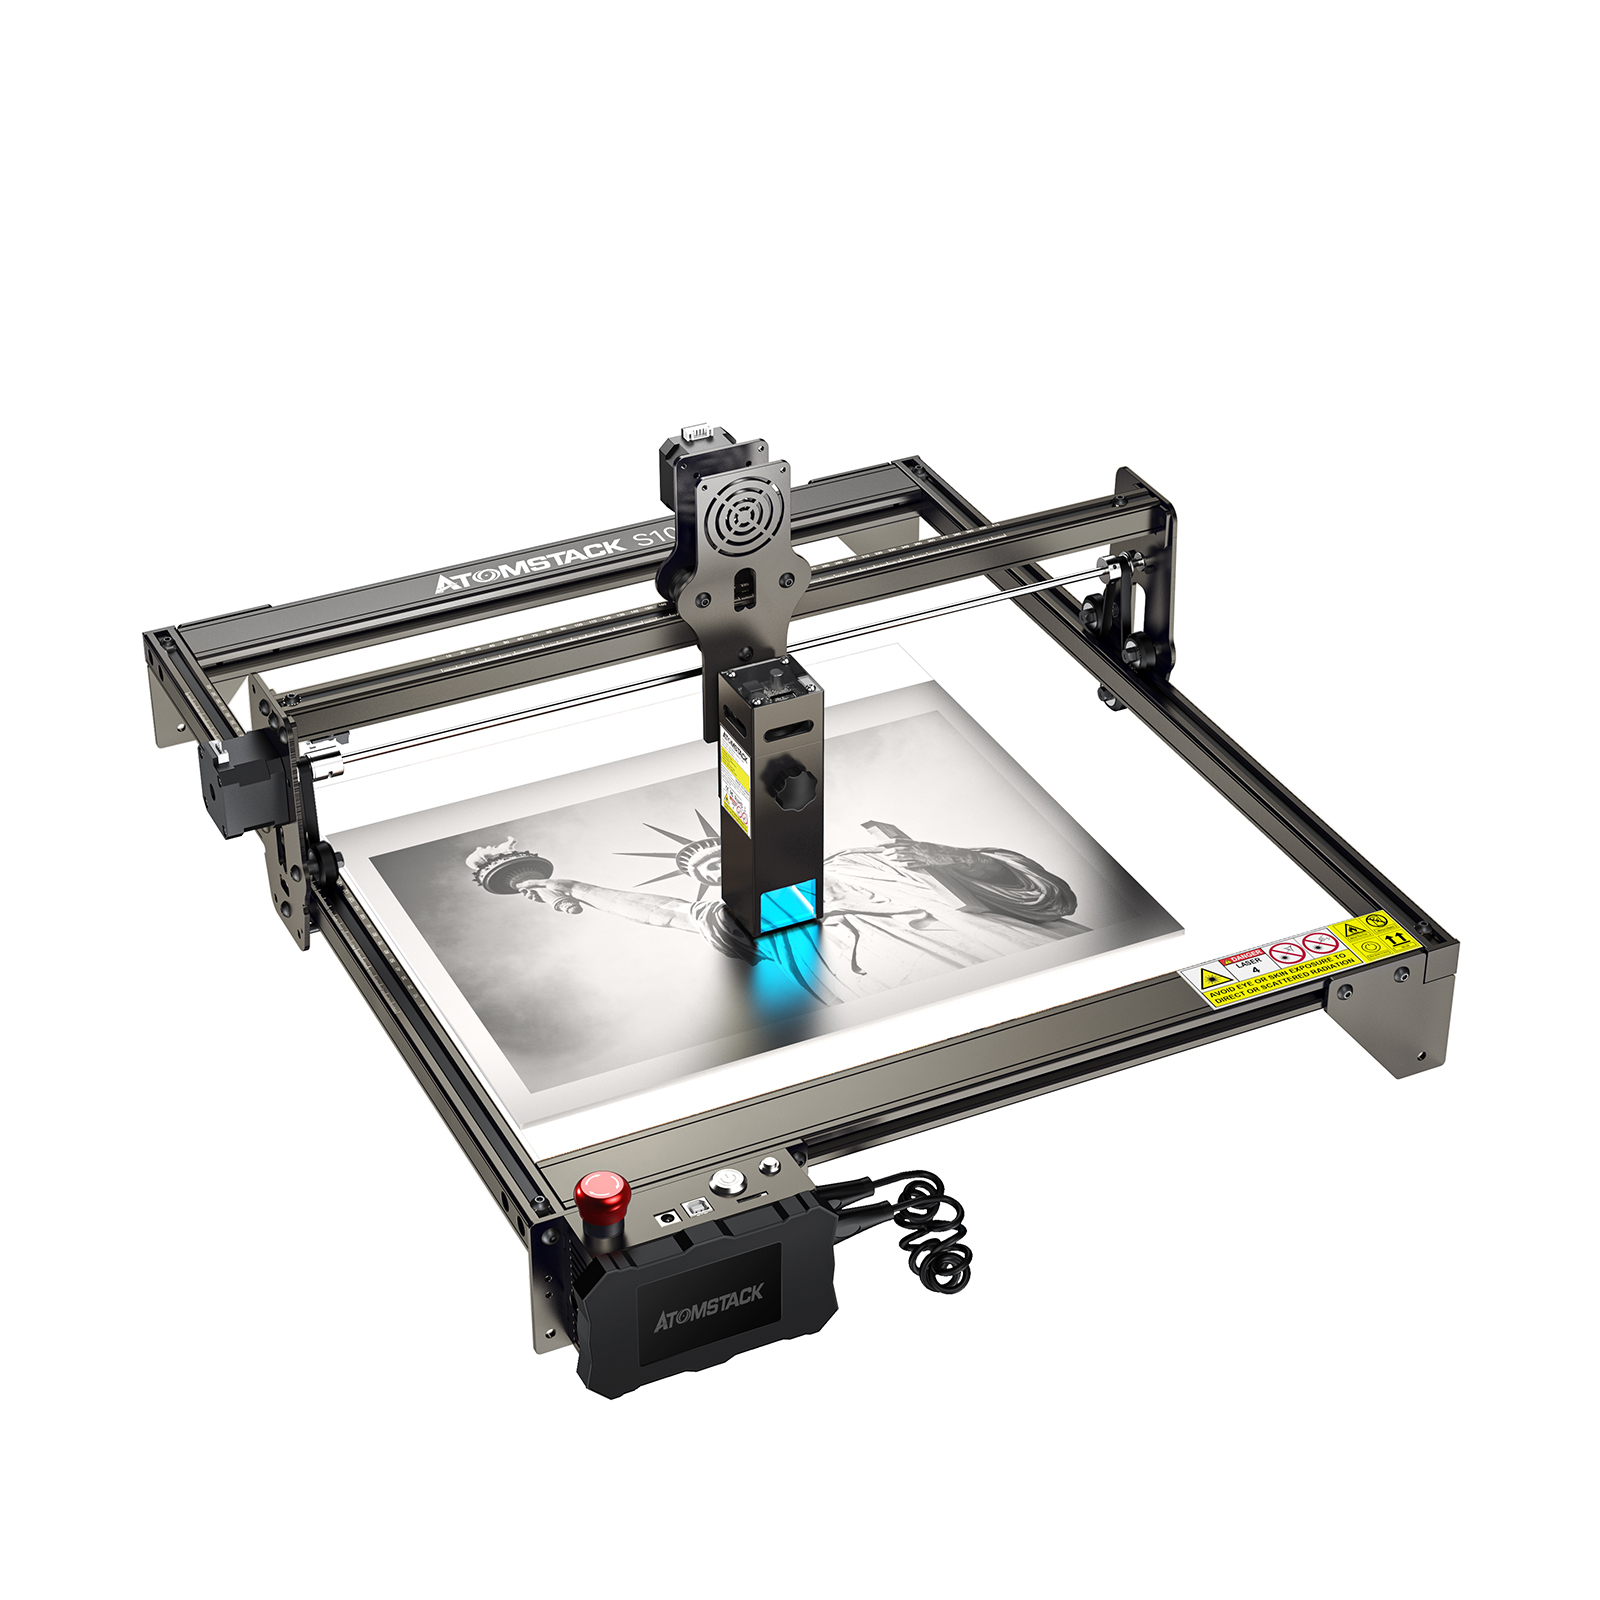 Find New ATOMSTACK S10 PRO Flagship Dual Laser Laser Engraving Cutting Machine Support Offline Engraving Laser Engraver 10W Output Power Fixed Focus 304 Mirror Stainless Steel Engraving Metal Acrylic Leather 20mm DIY Engraver for Sale on Gipsybee.com with cryptocurrencies